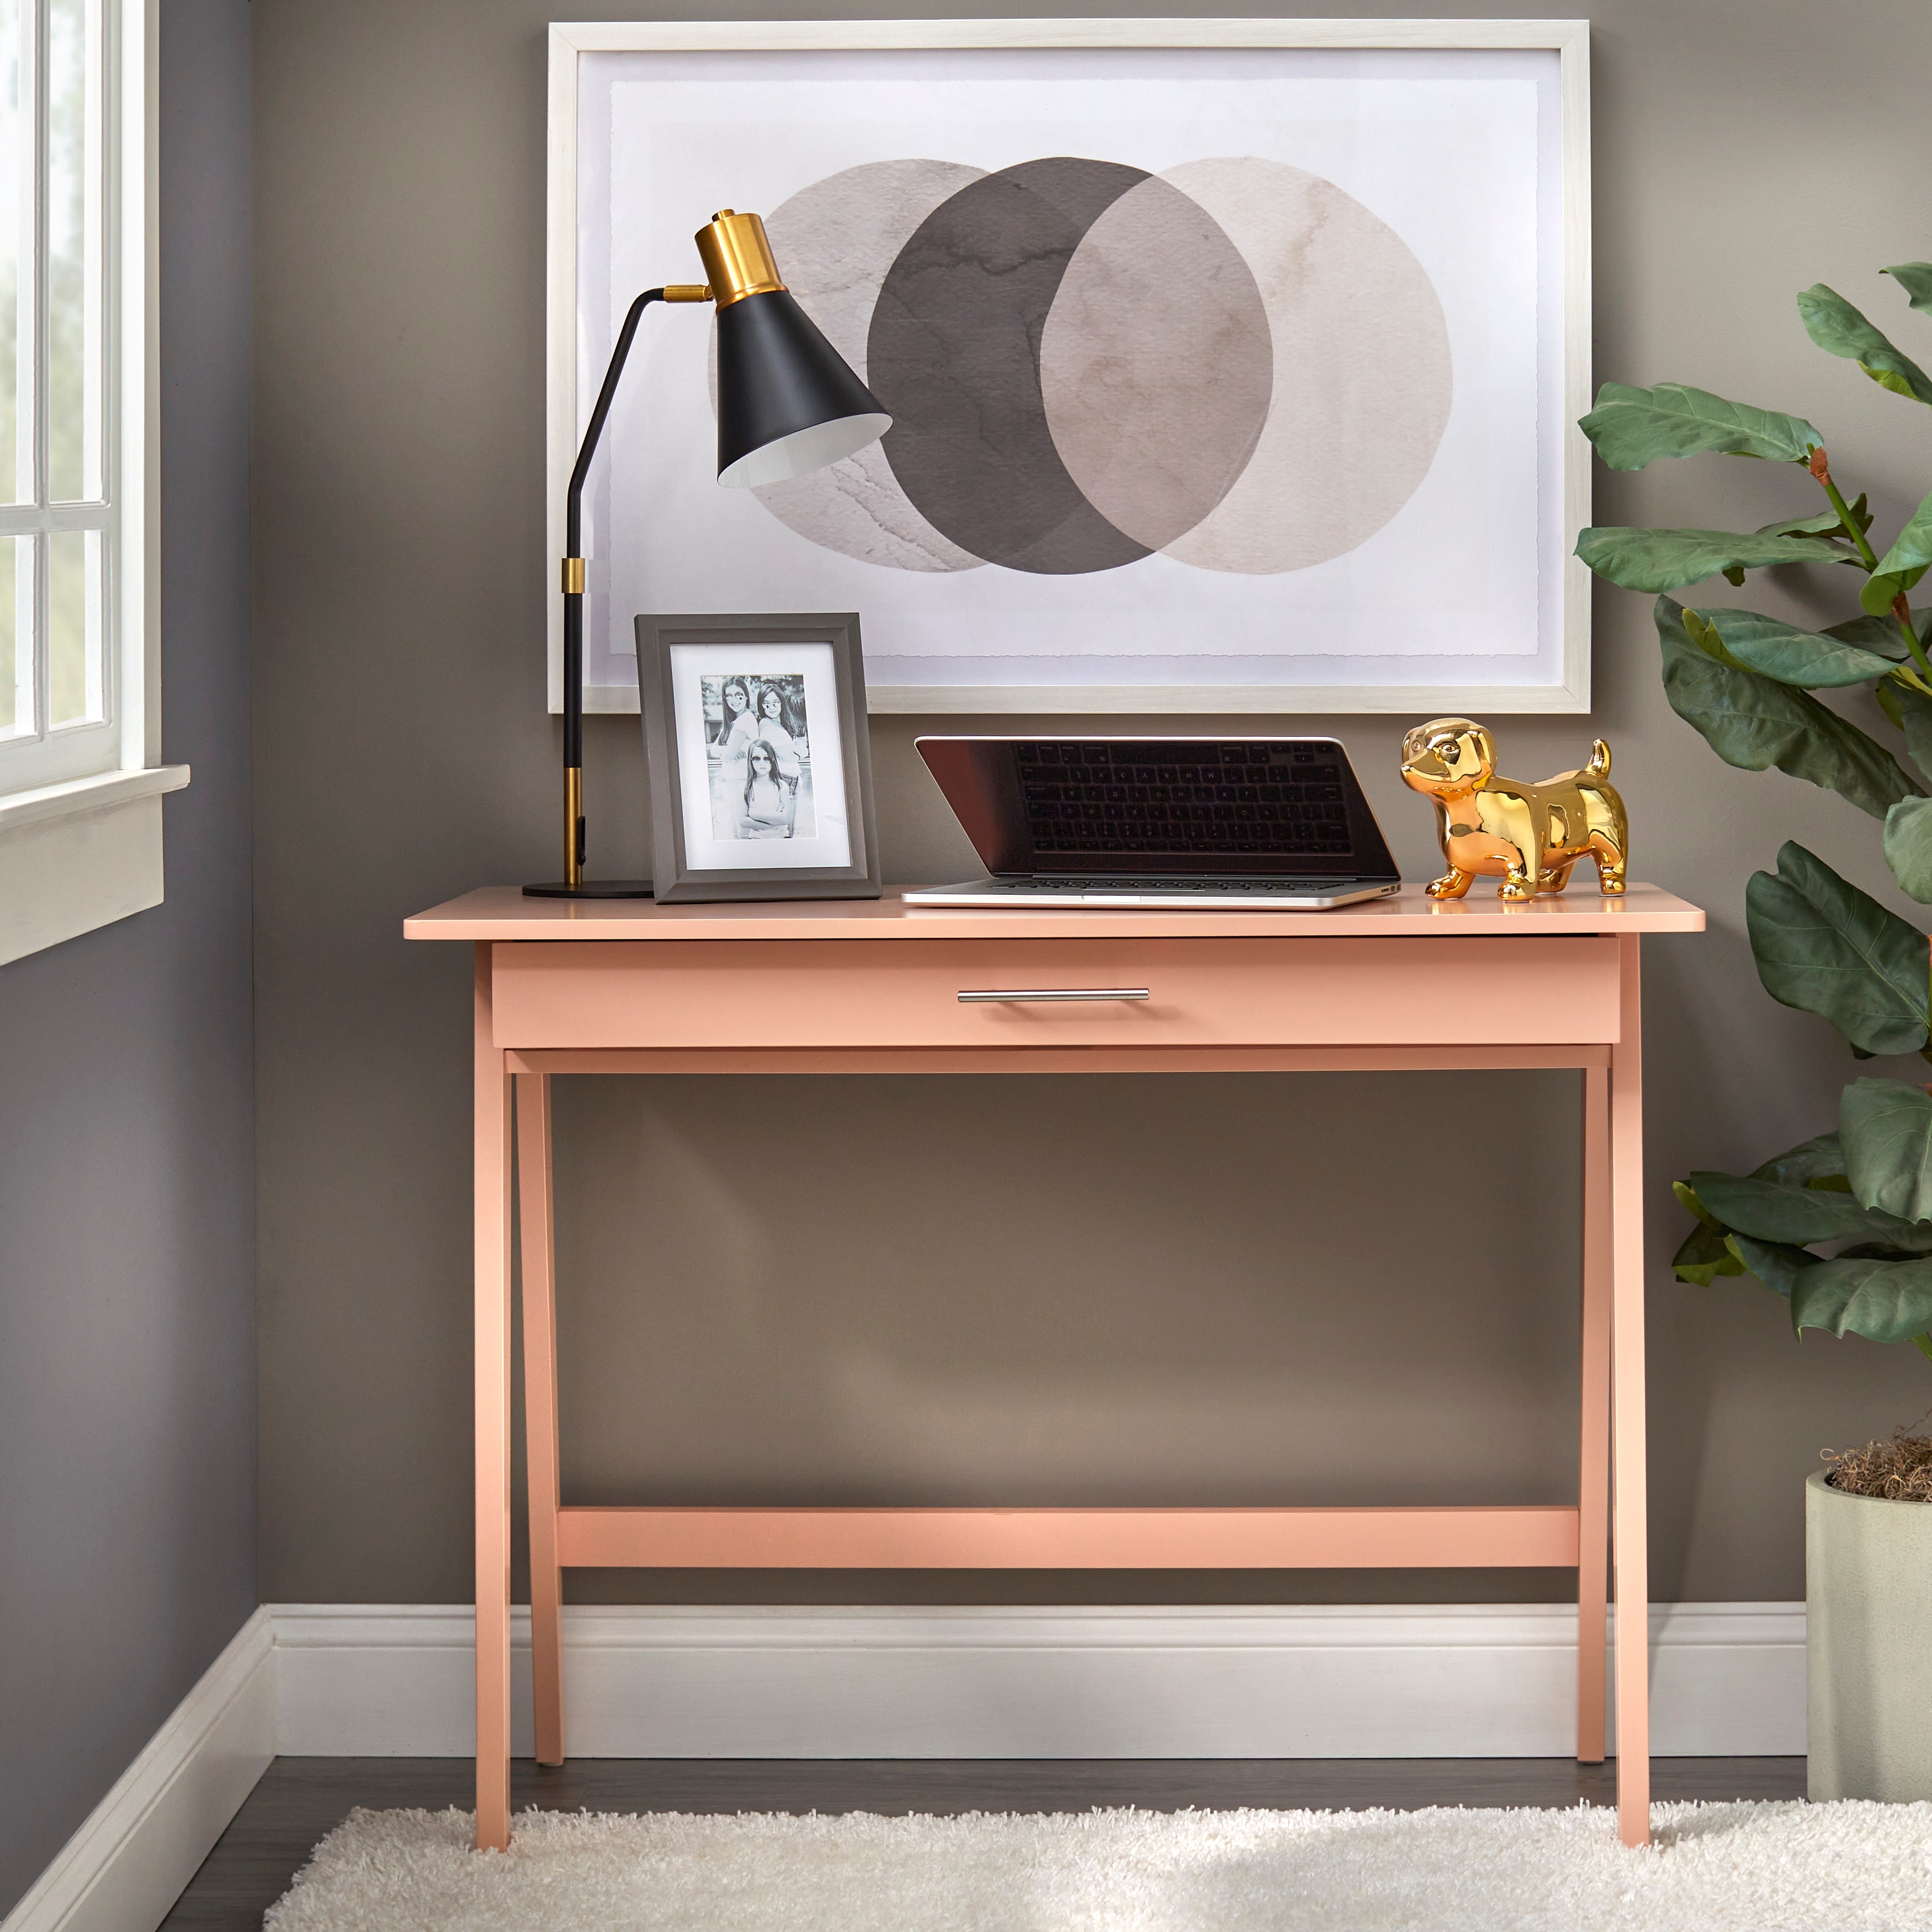 https://ak1.ostkcdn.com/images/products/is/images/direct/f7eafd65372ce7bcd3aa111a70fe1cdf59c94914/Simple-Living-Rollins-Desk.jpg